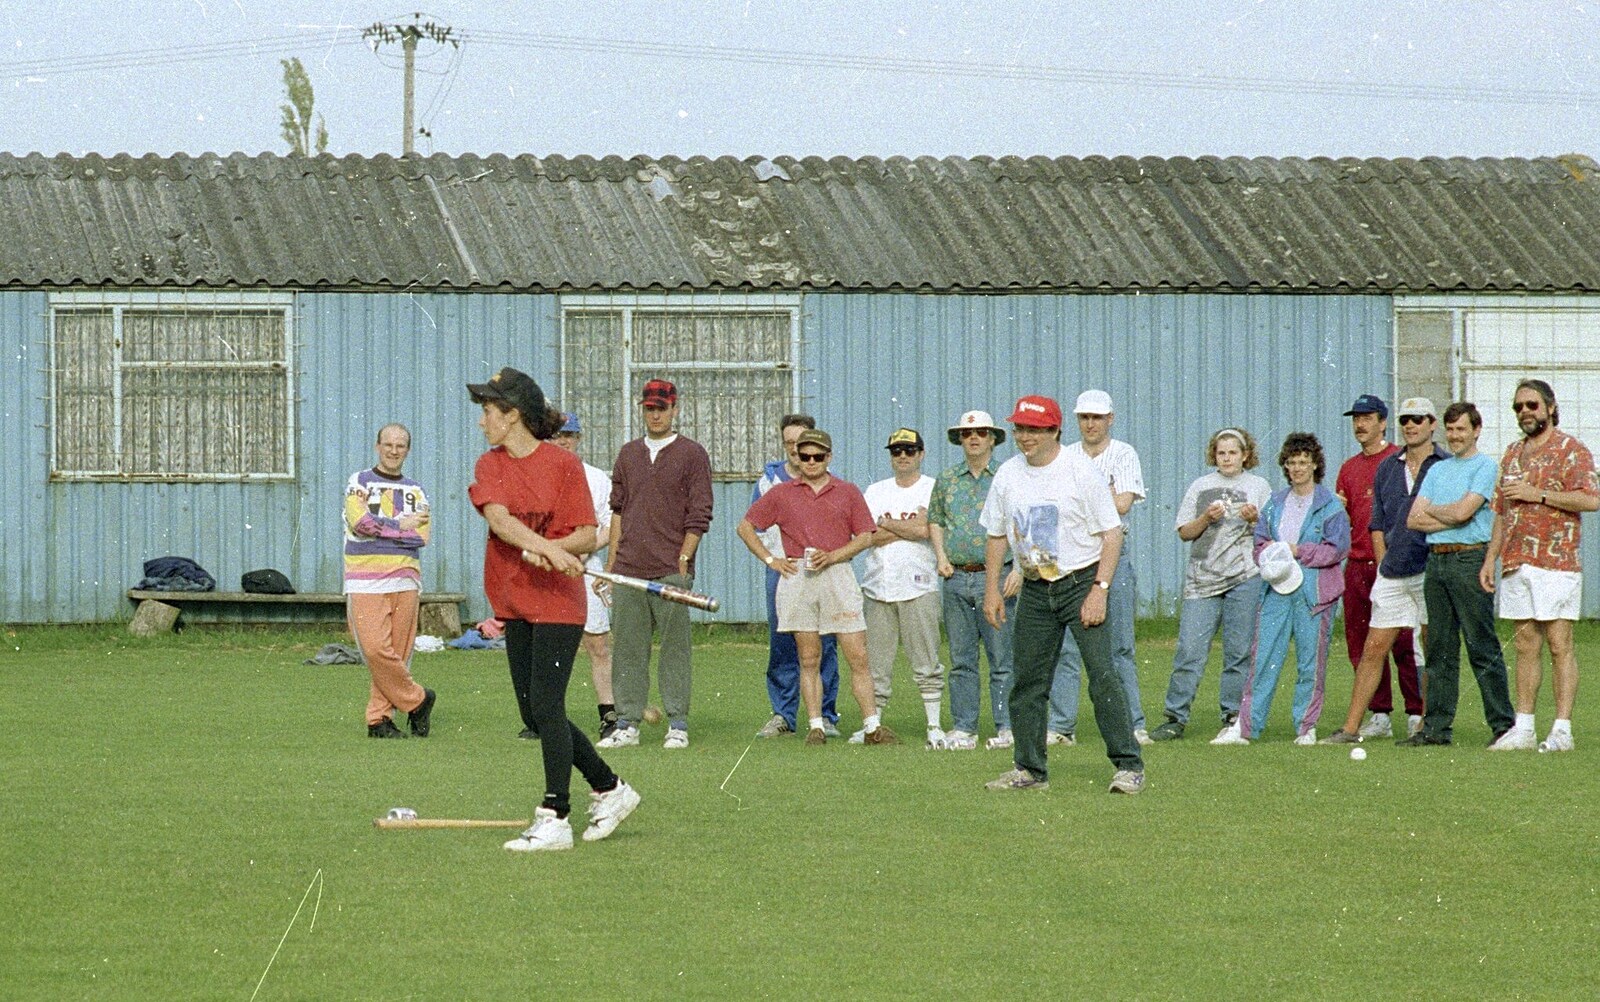 Clays Softball and Printec Reunion, Ditchingham and Stoke Ash, Suffolk - 2nd June 1994: Taking a swing